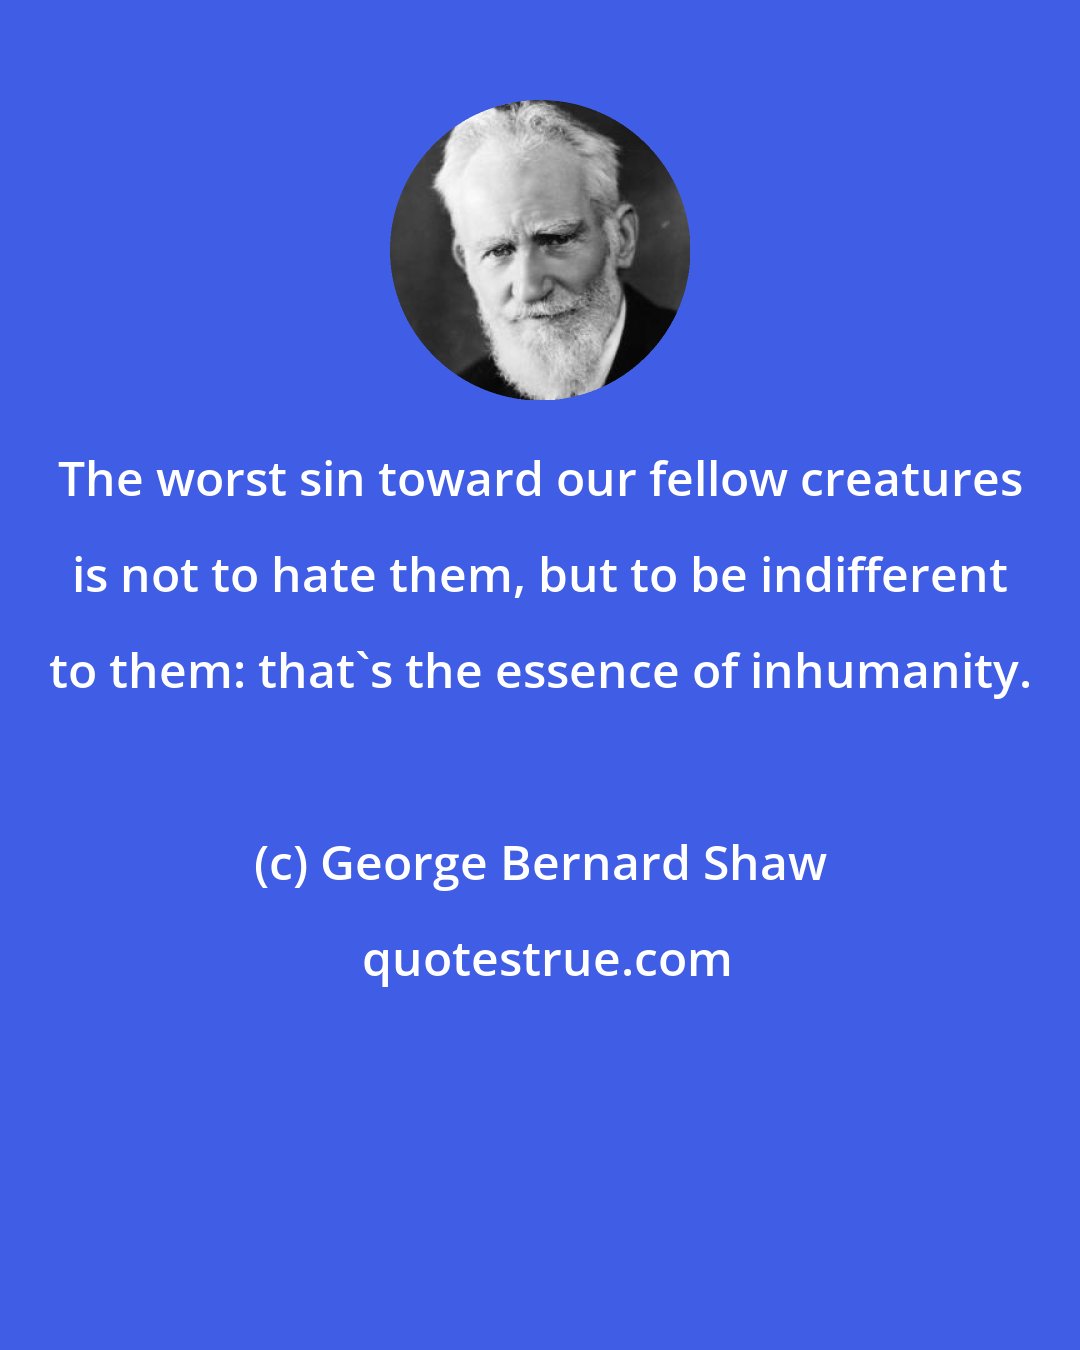 George Bernard Shaw: The worst sin toward our fellow creatures is not to hate them, but to be indifferent to them: that's the essence of inhumanity.